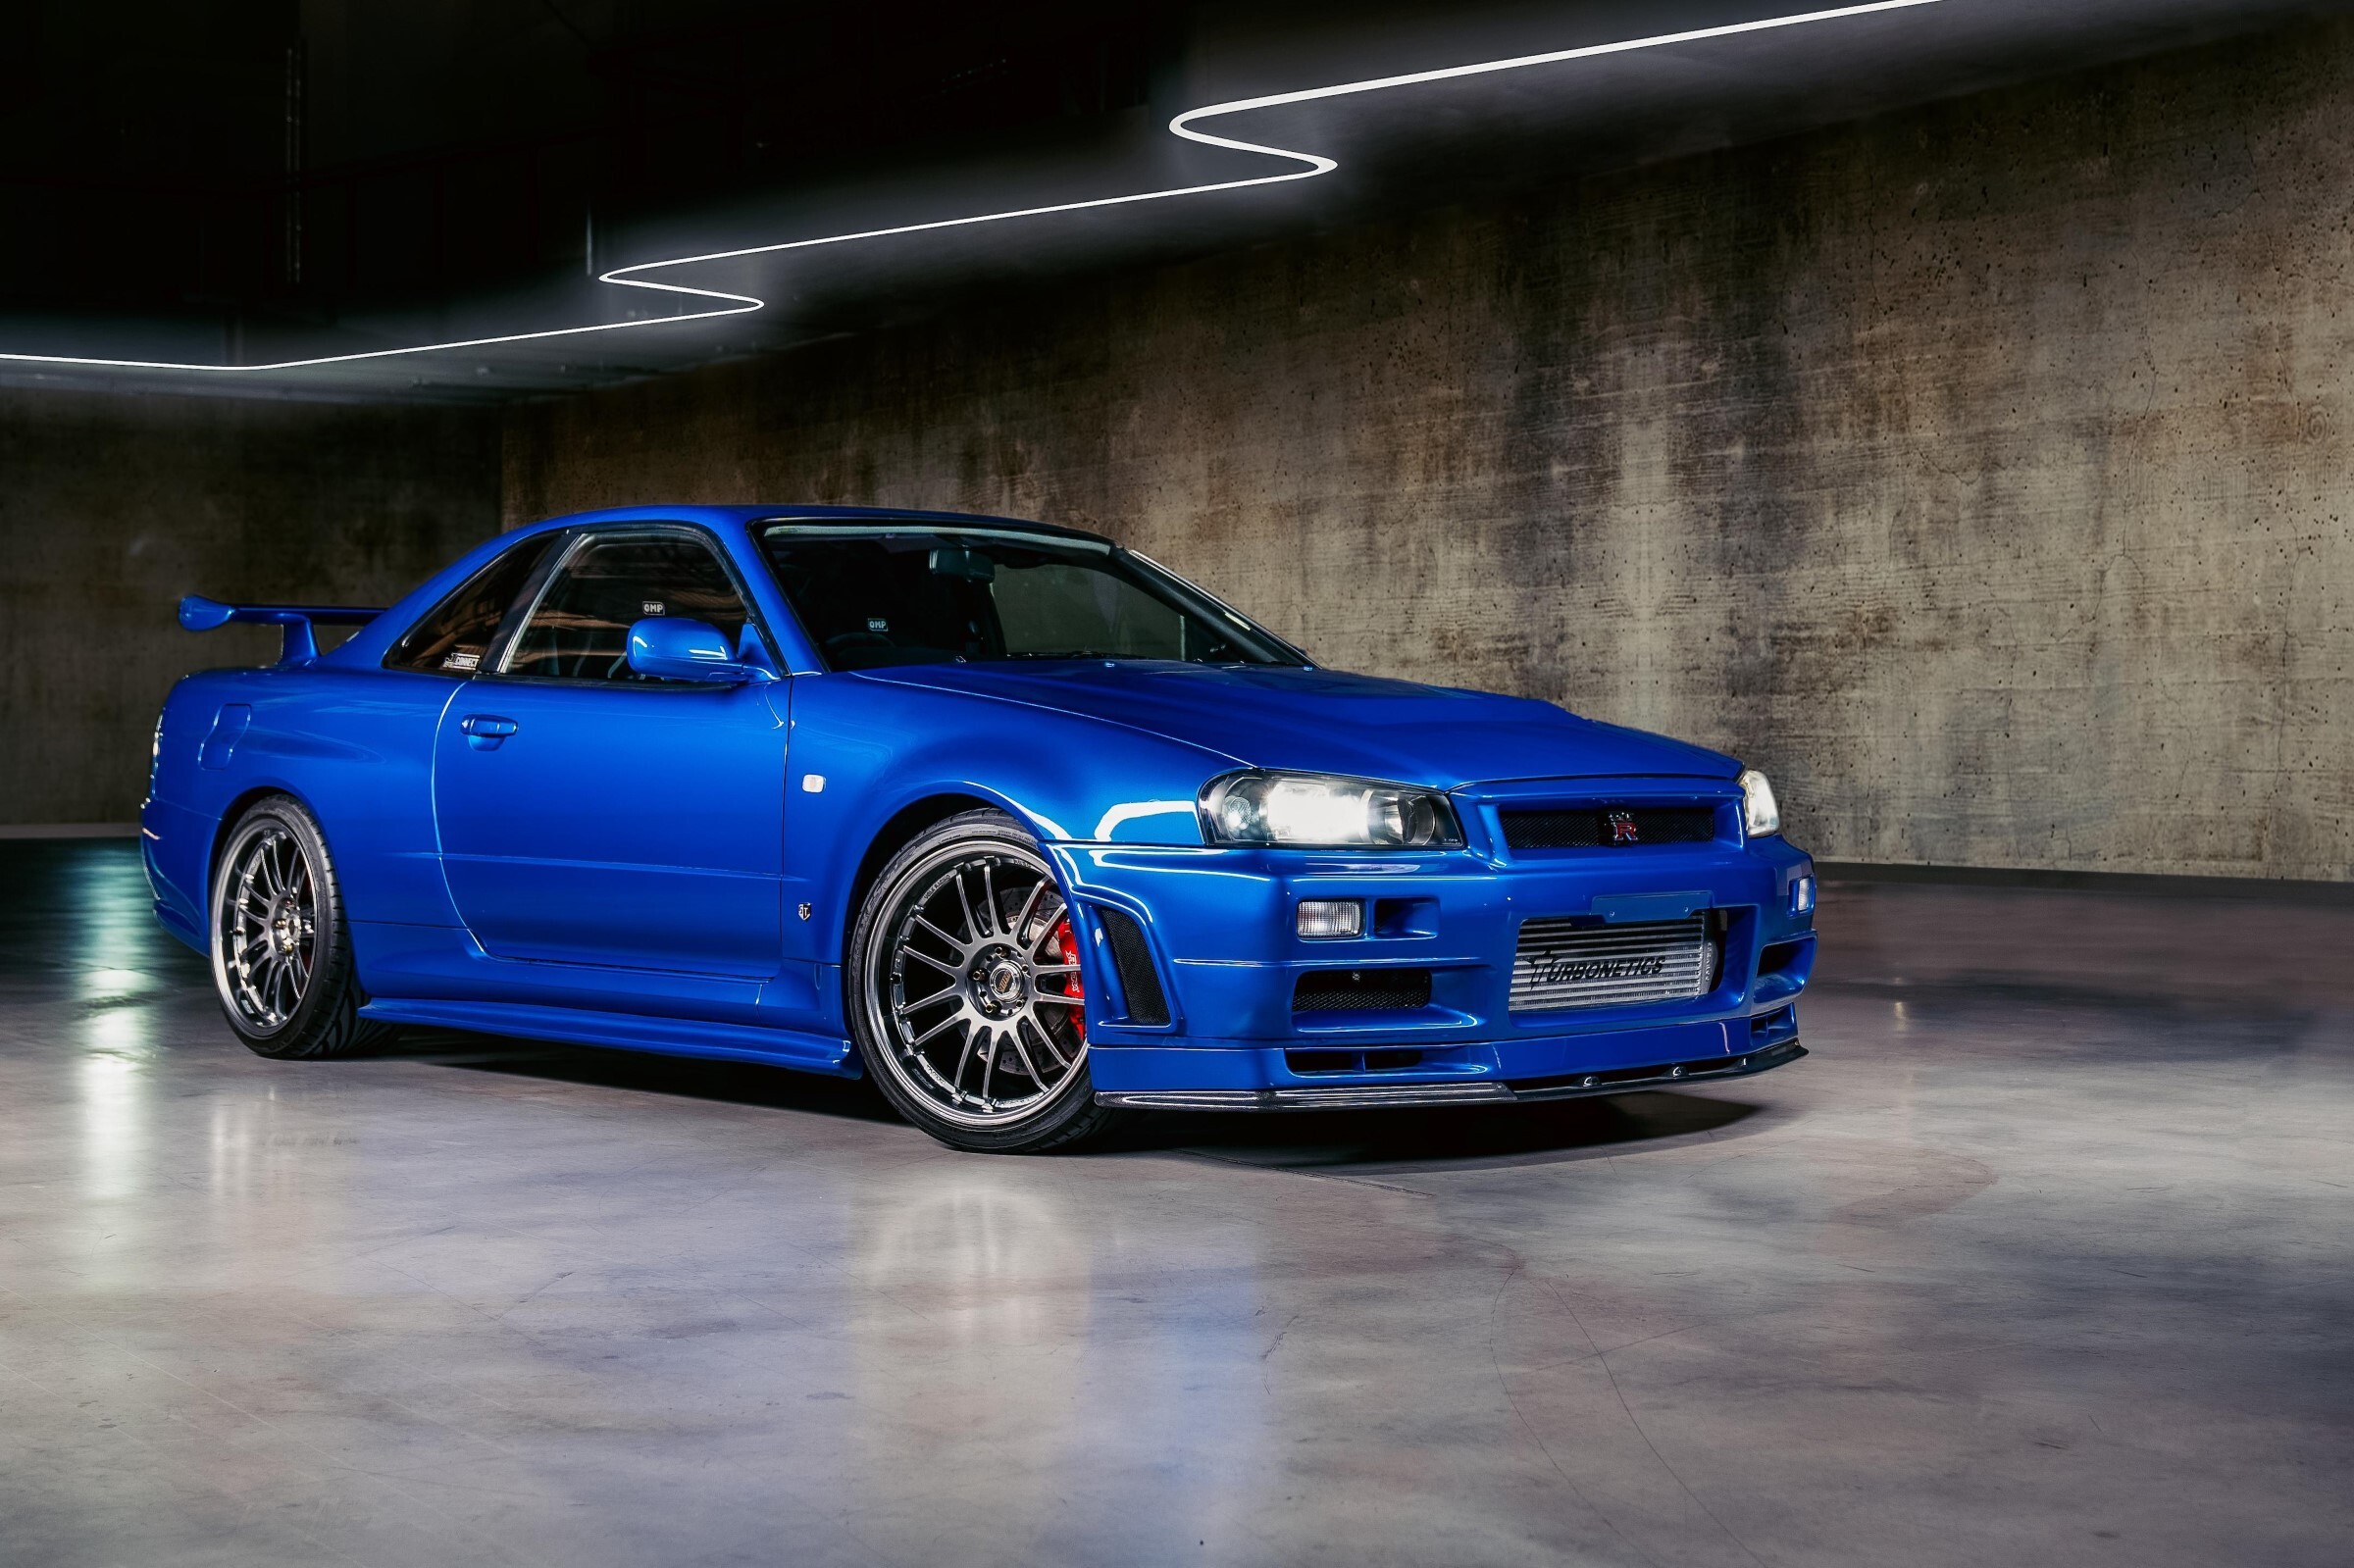 The sky’s the limit for this Paul Walker-driven Skyline GT-R 